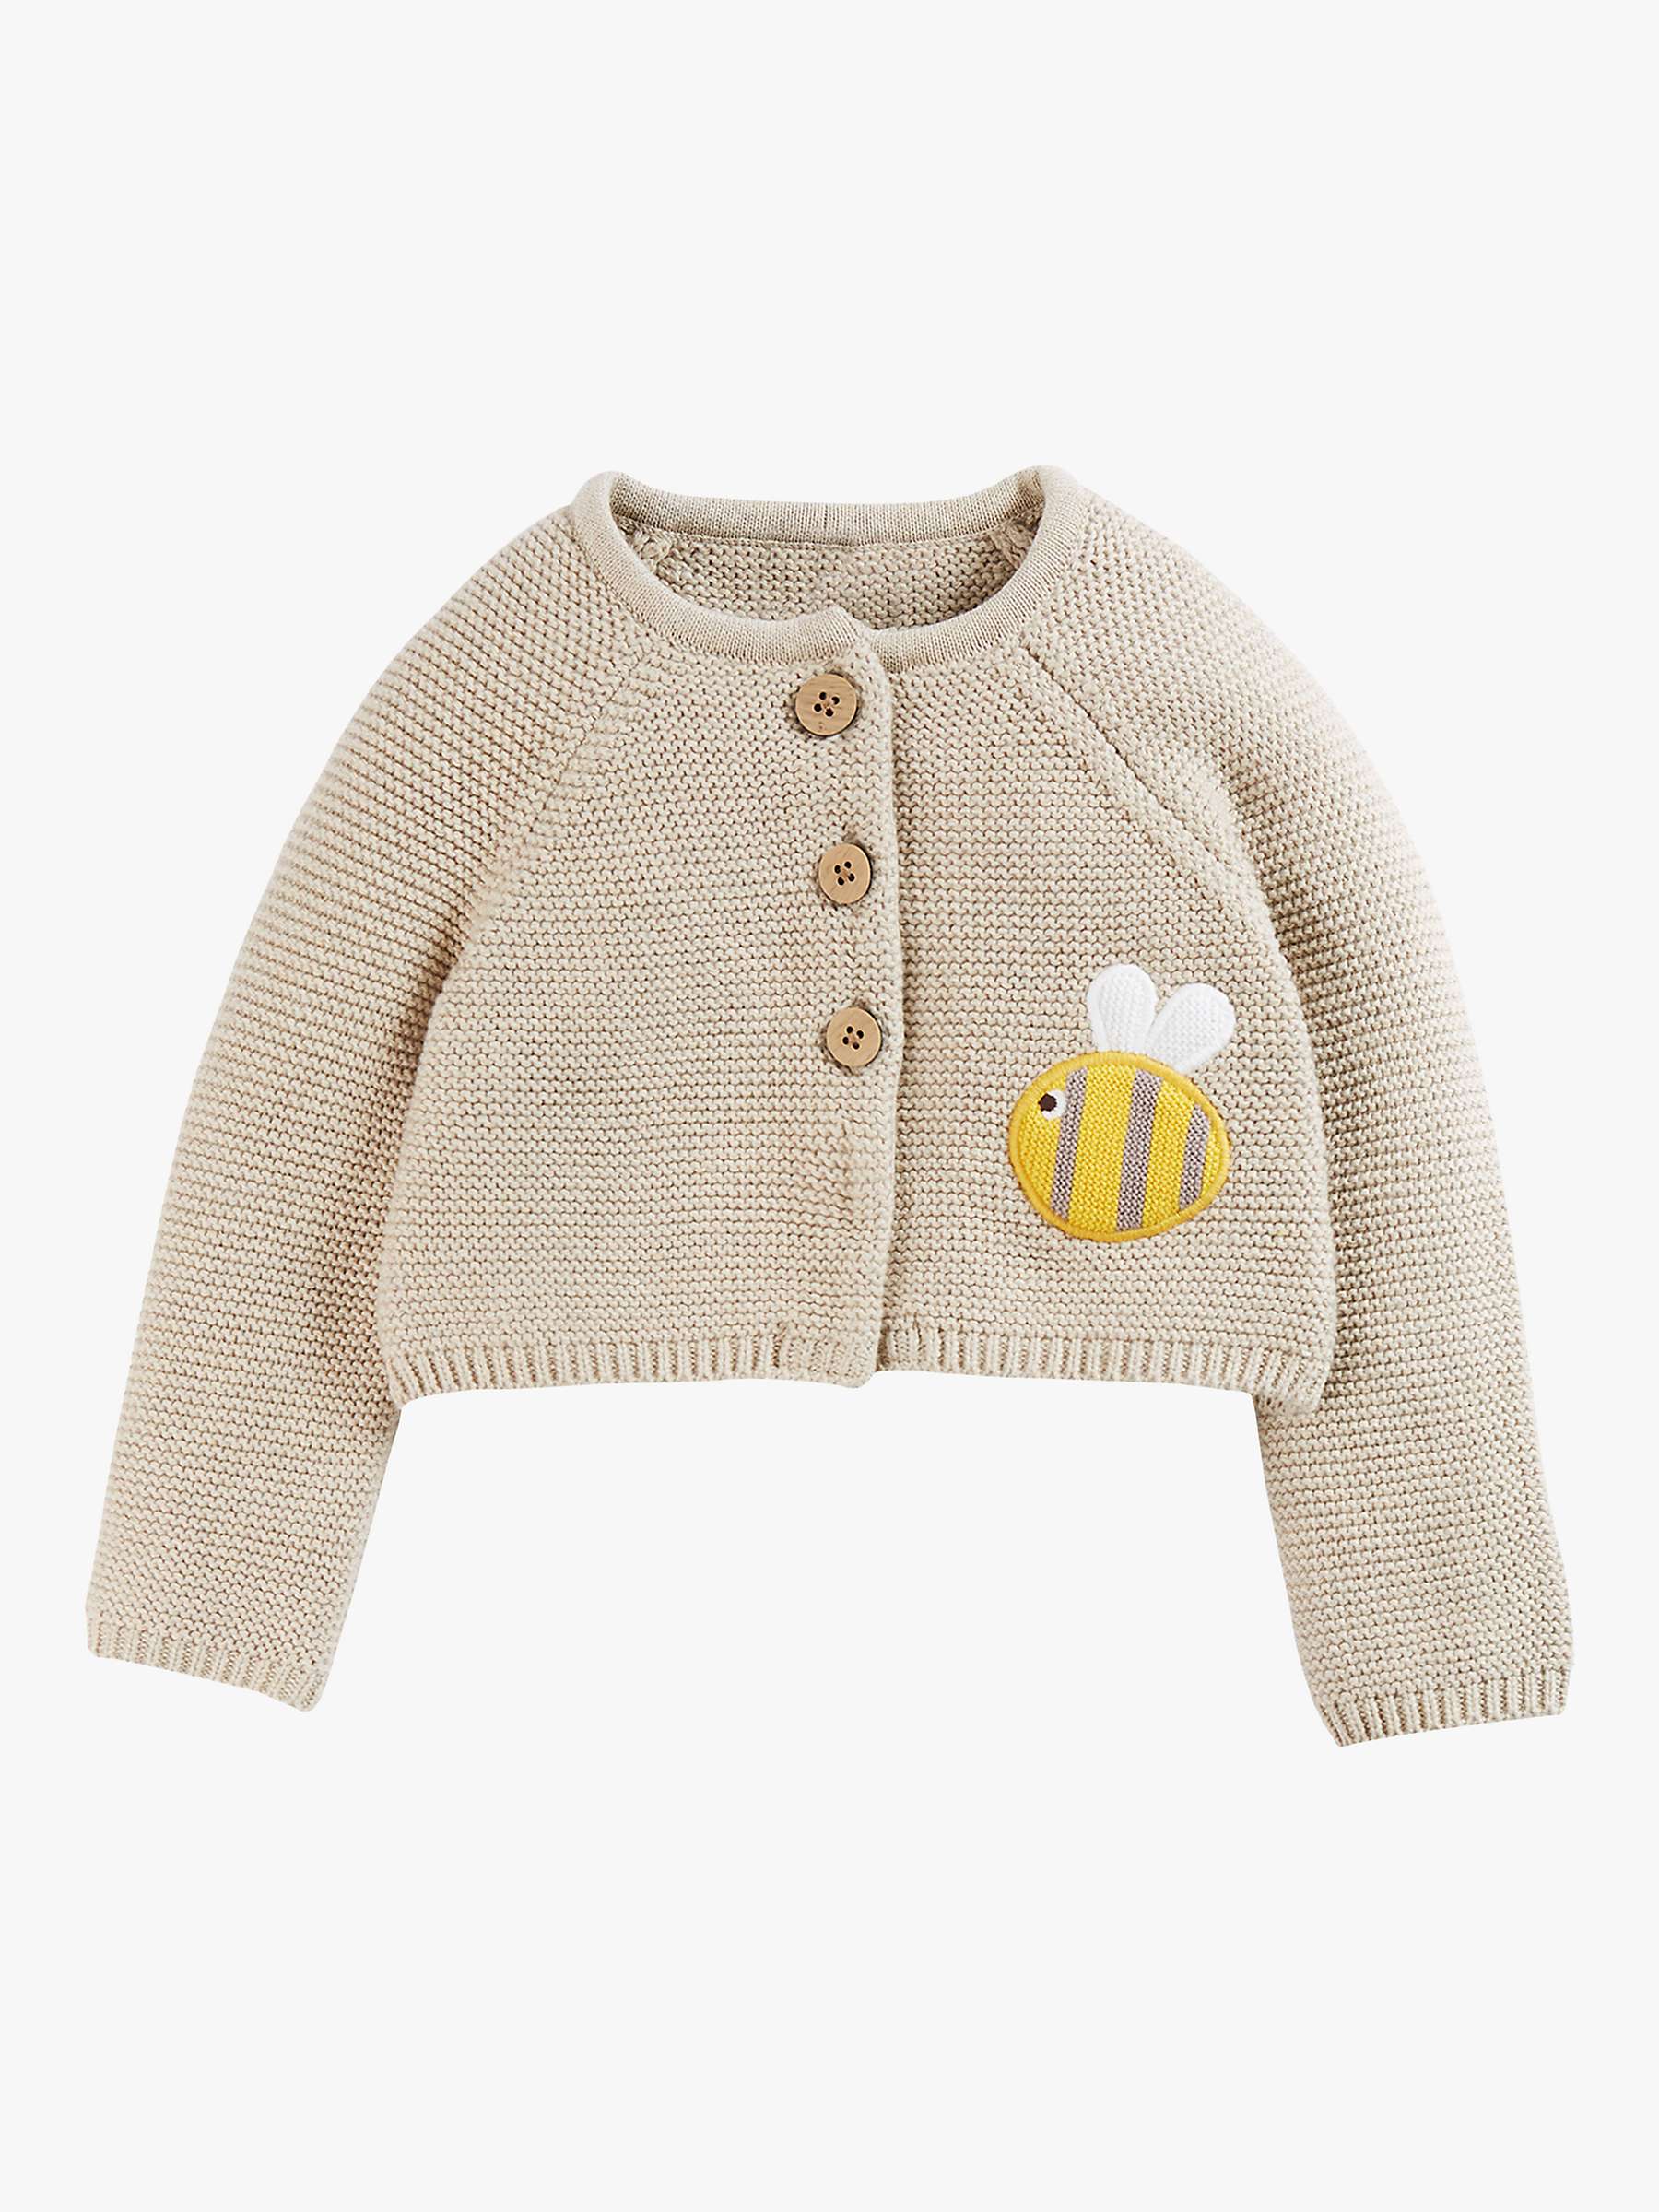 Buy Frugi Baby Cute Embroidered Bee Organic Cotton Cardigan, Oatmeal Online at johnlewis.com